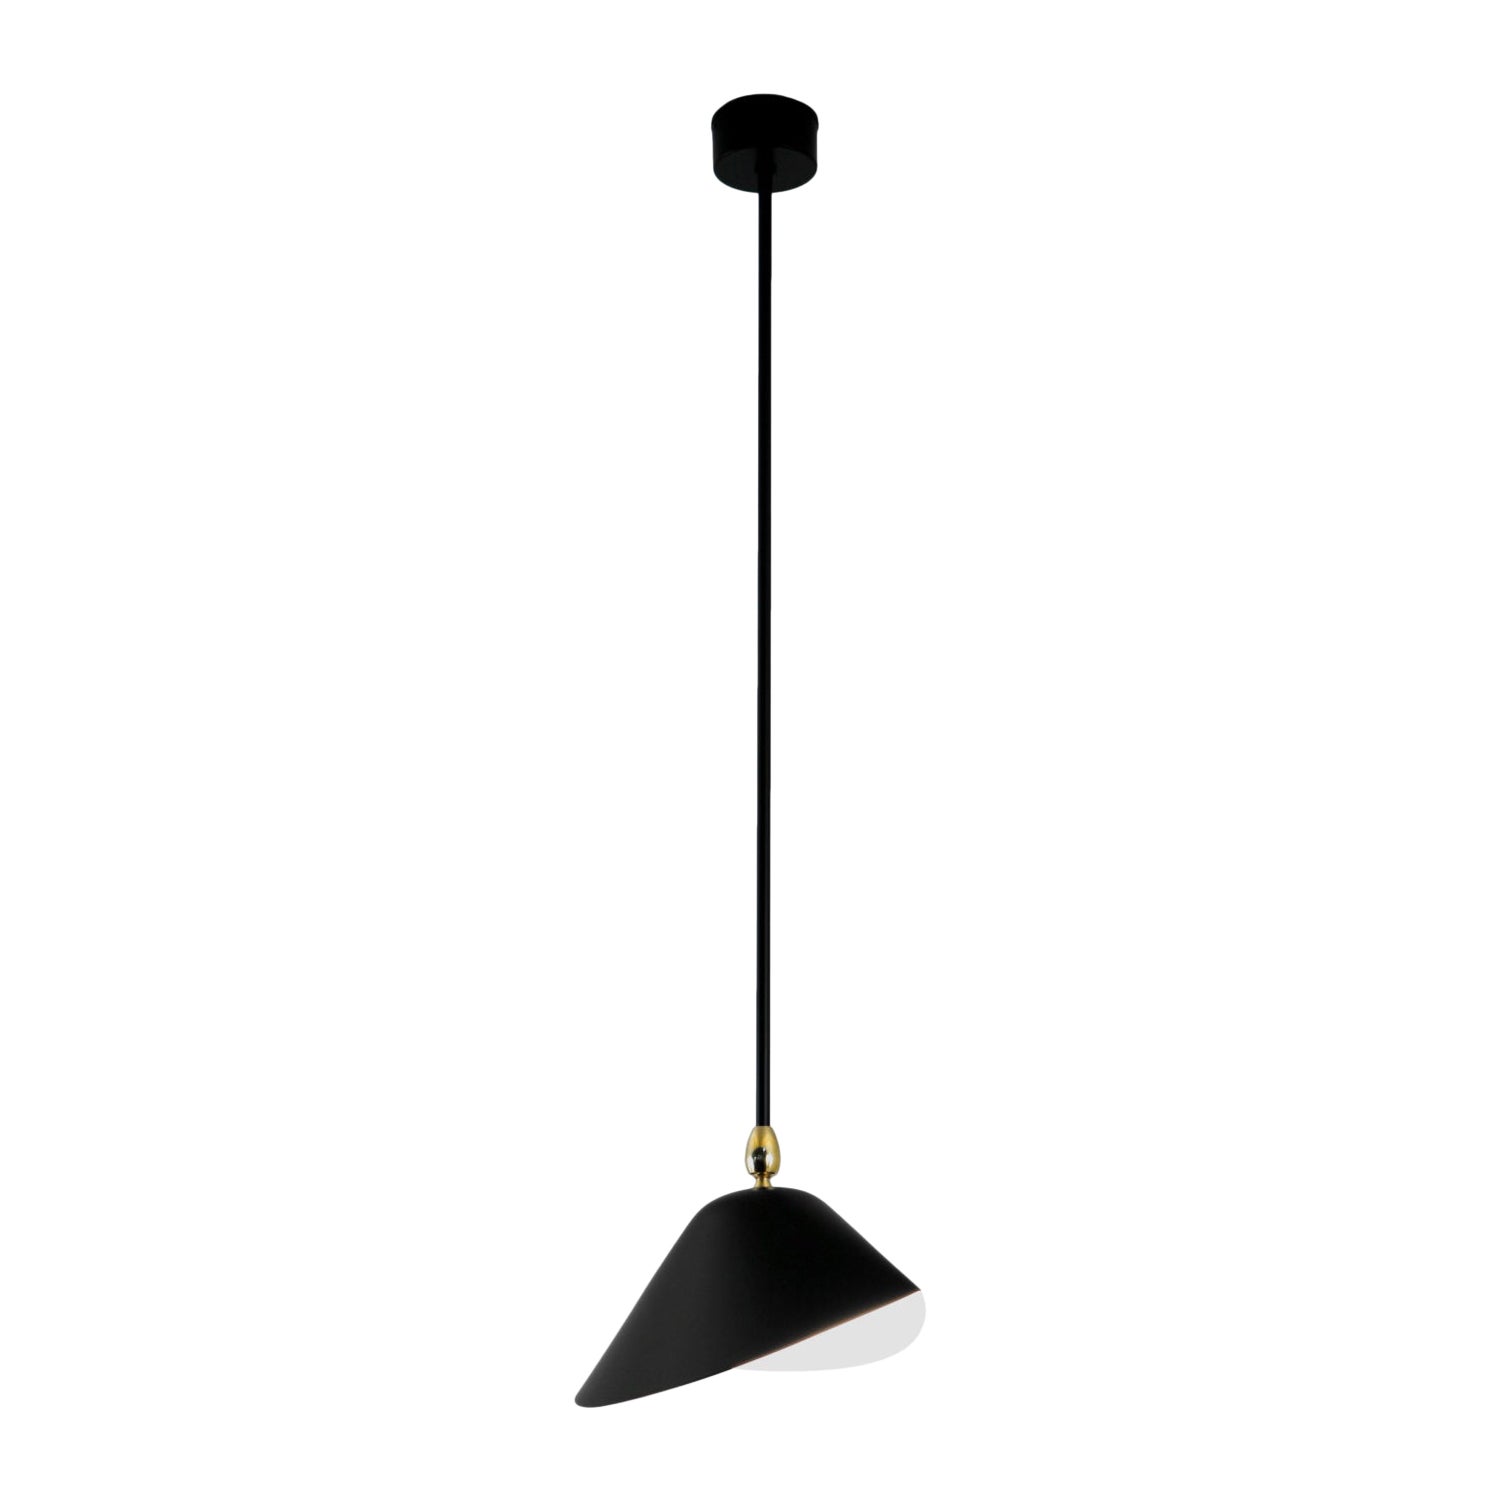 Serge Mouille Library Ceiling Lamp in Black